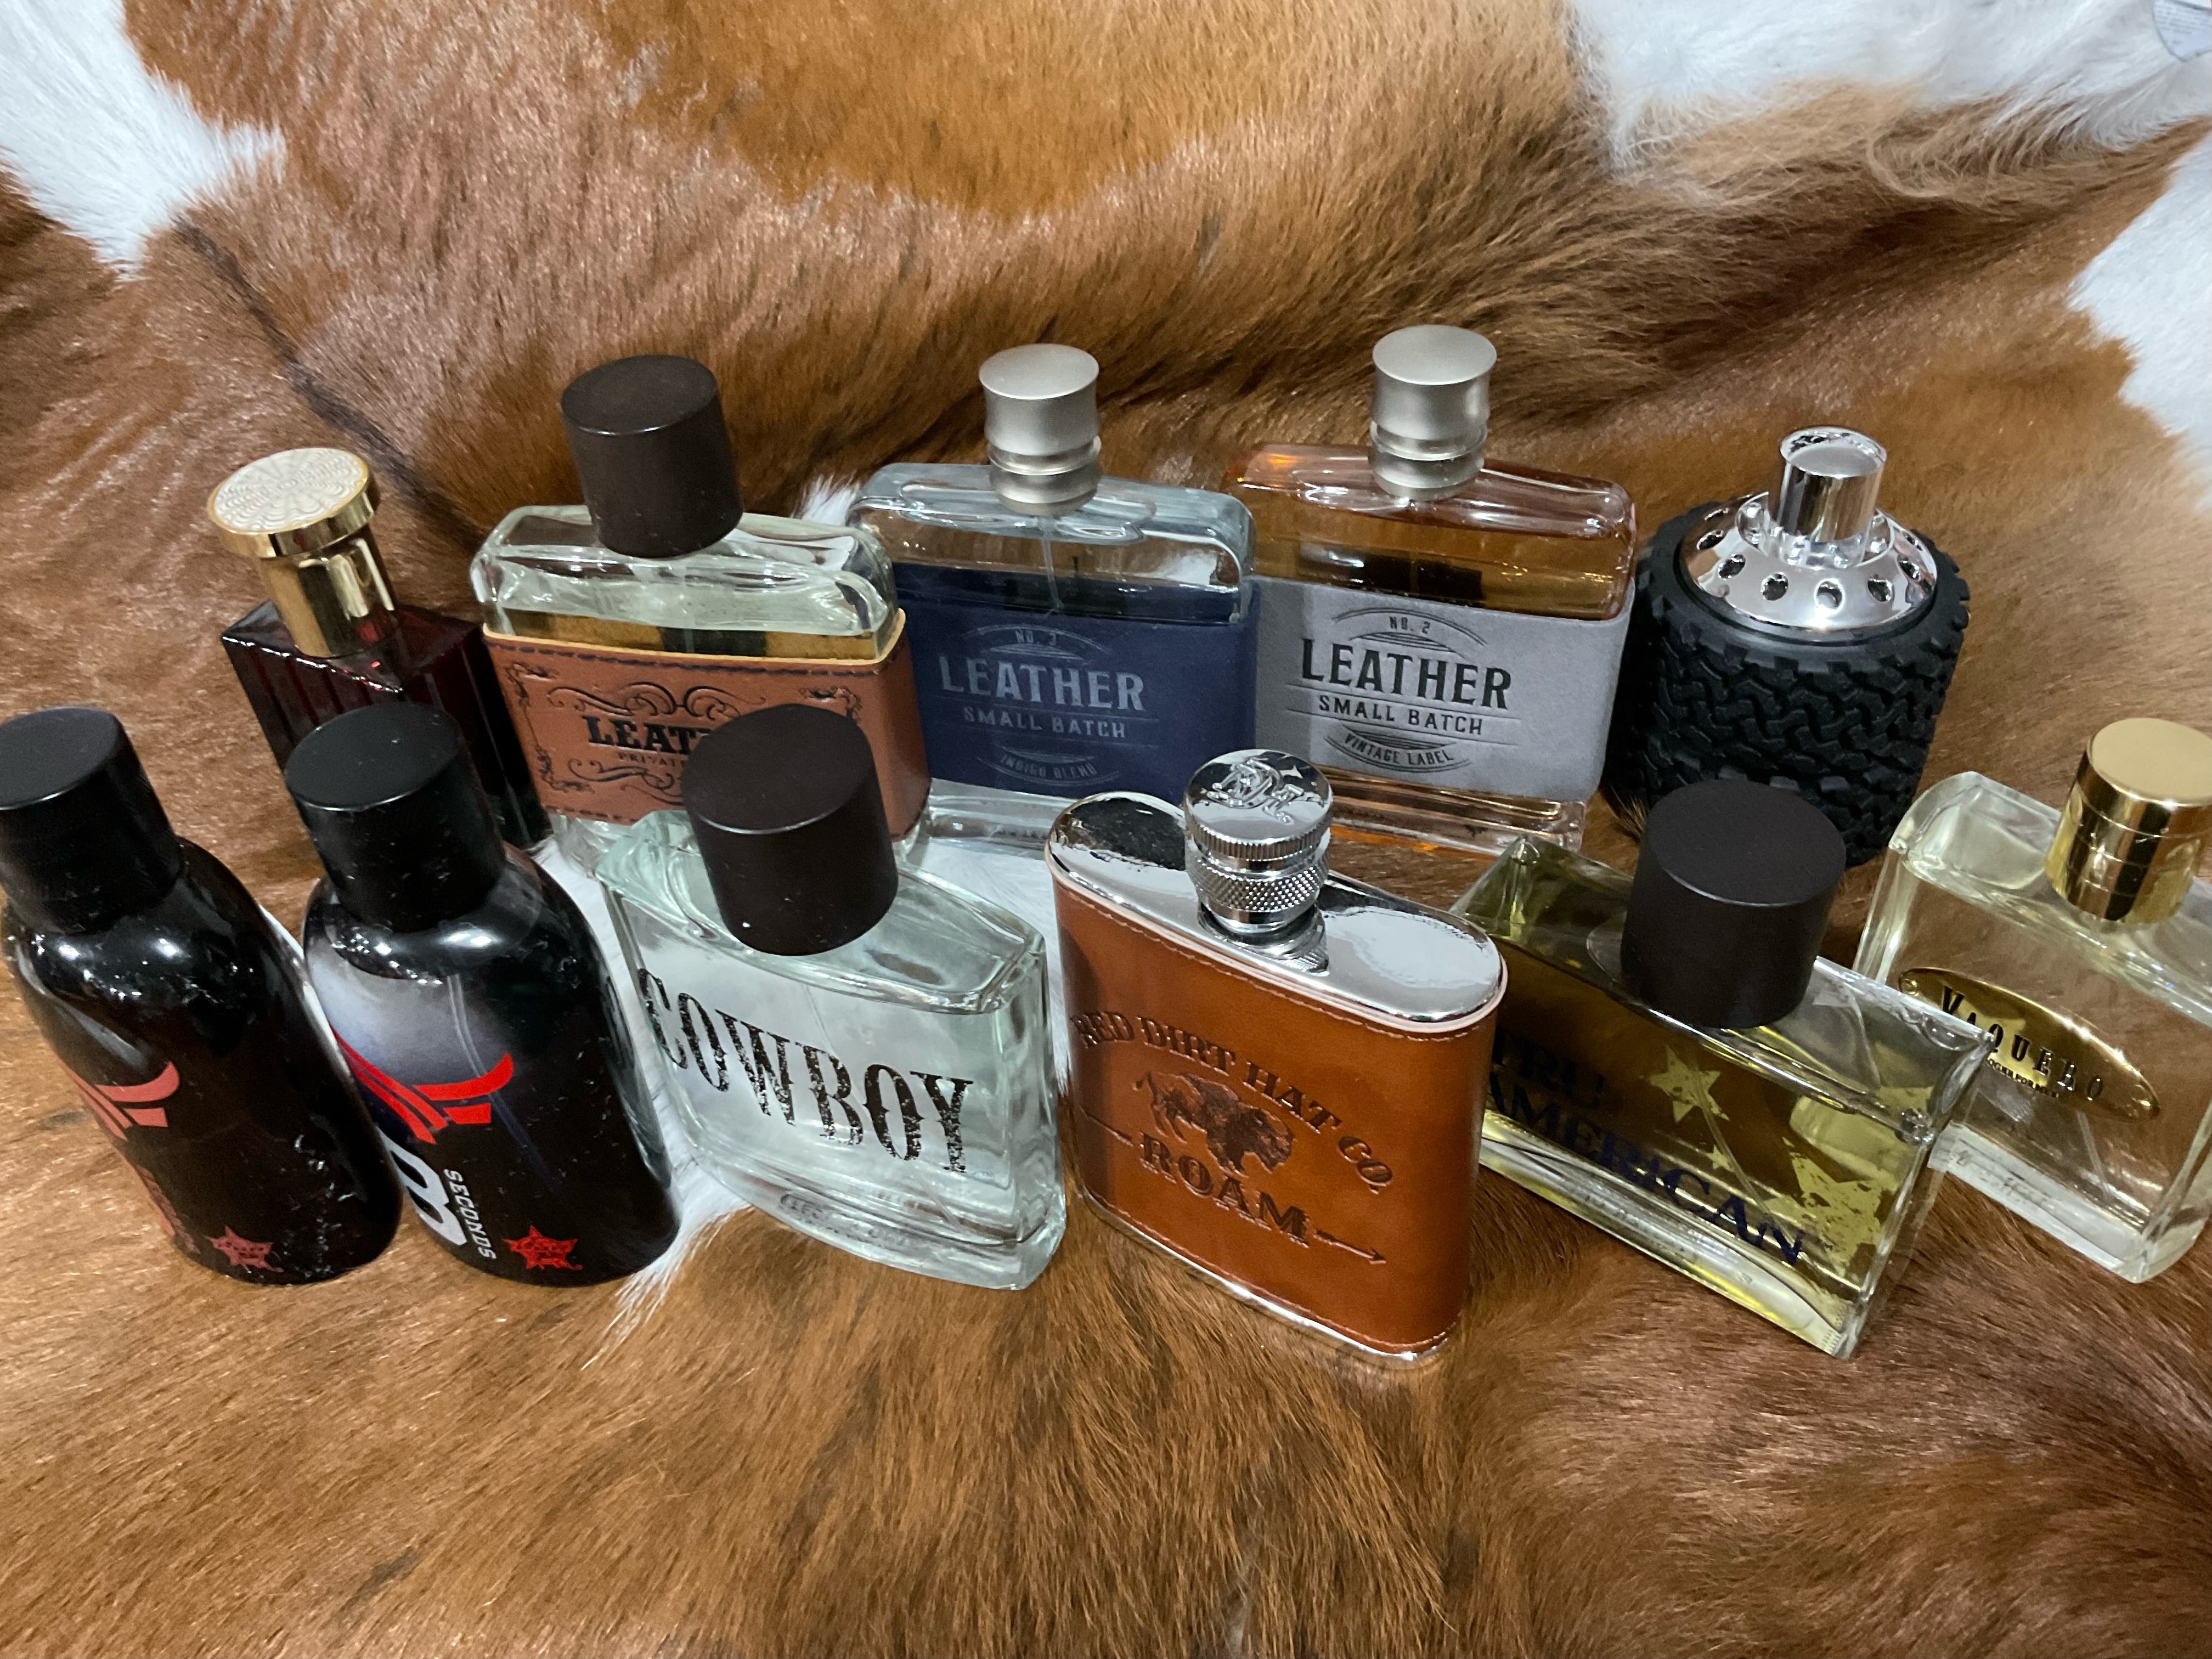 Men's Cologne Fragrance - Yellowstone, COWBOY, Leather, and more